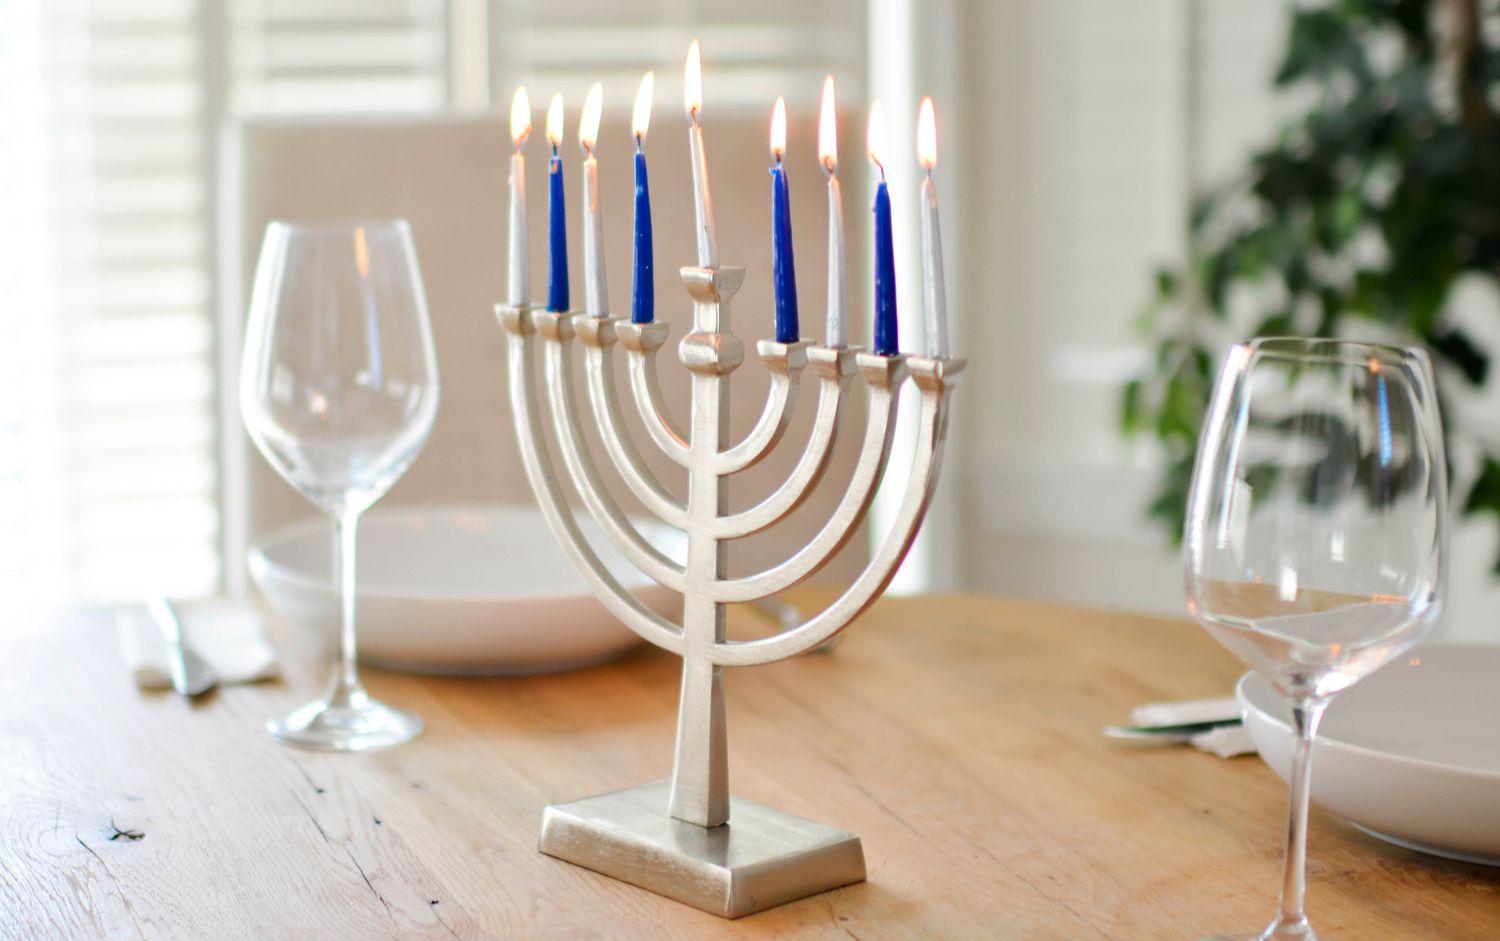 A lit menorah on a table with place settings